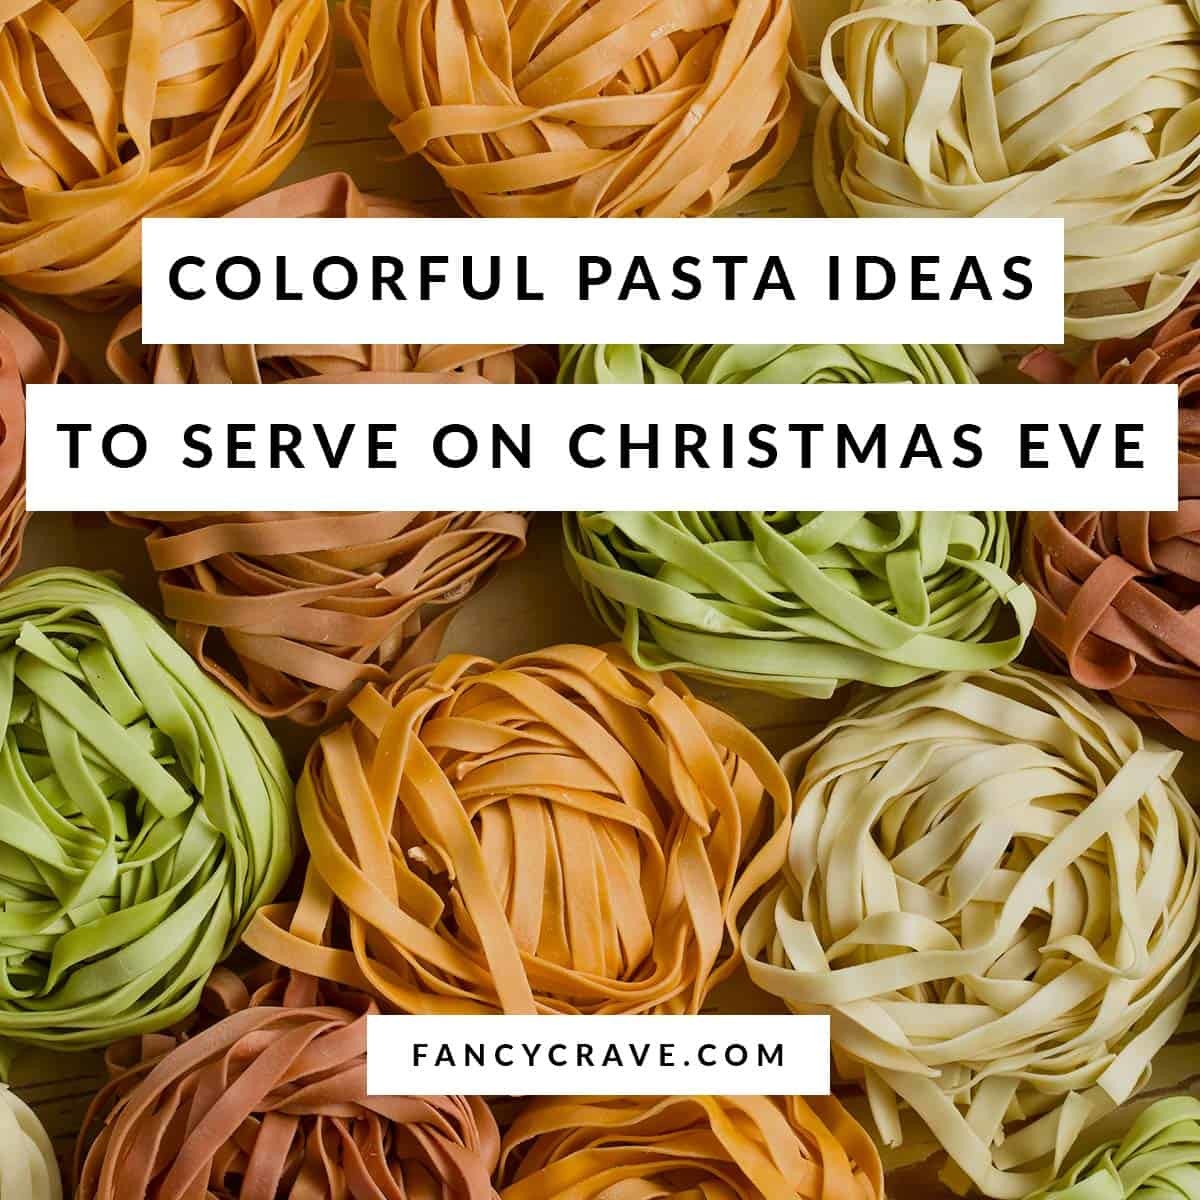 Colorful Pasta Ideas to Serve on Christmas Eve